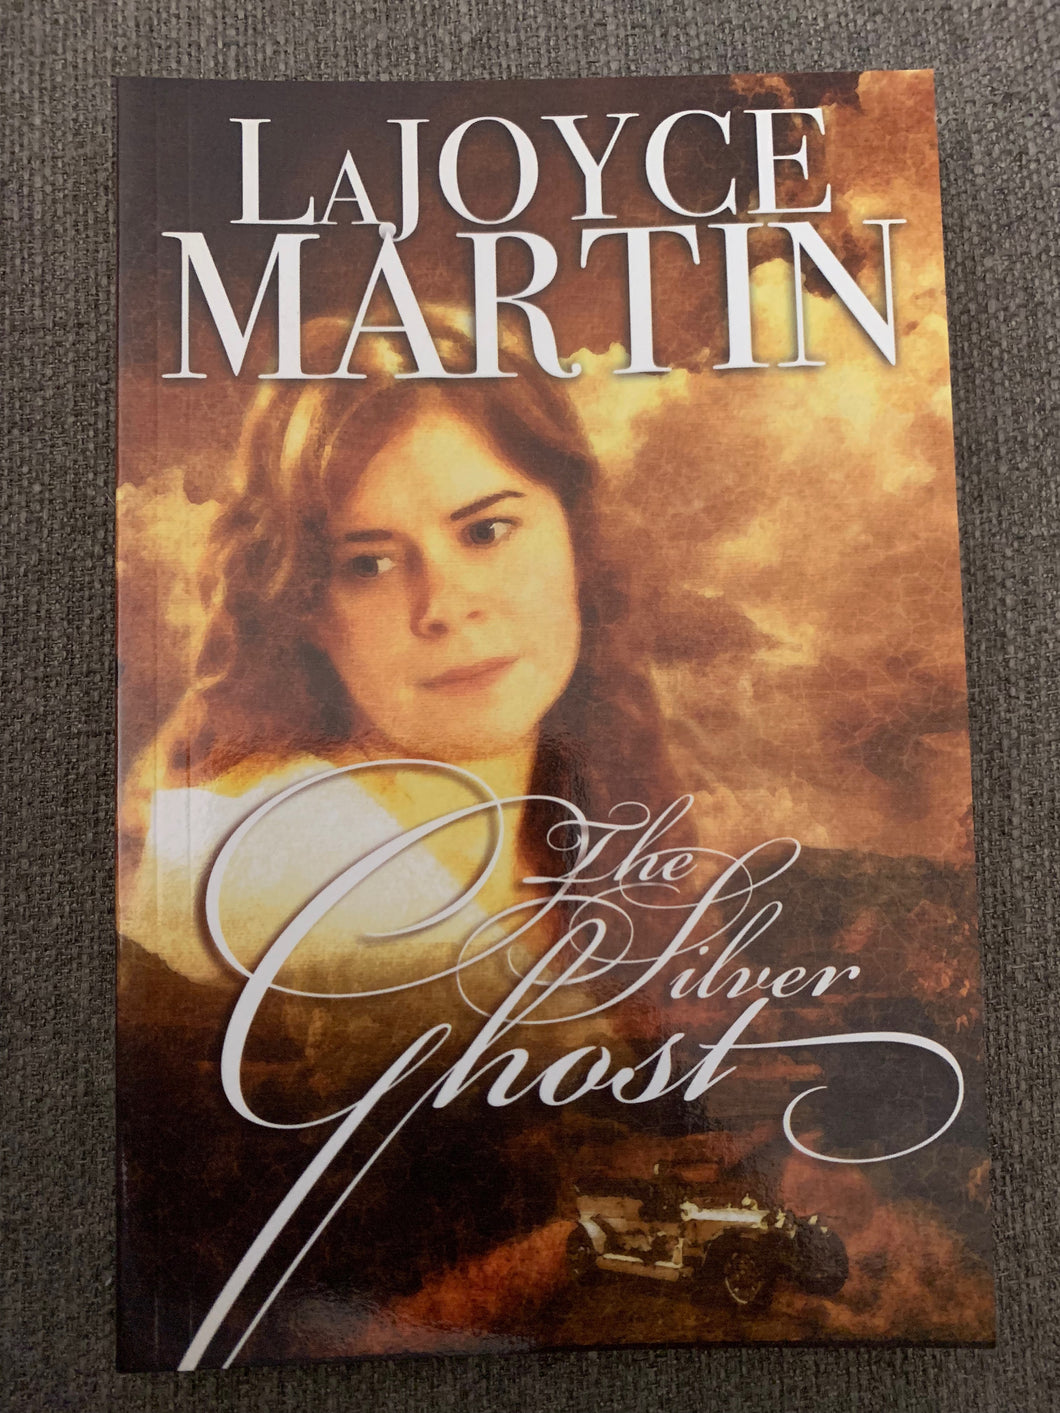 The Silver Ghost by LaJoyce Martin